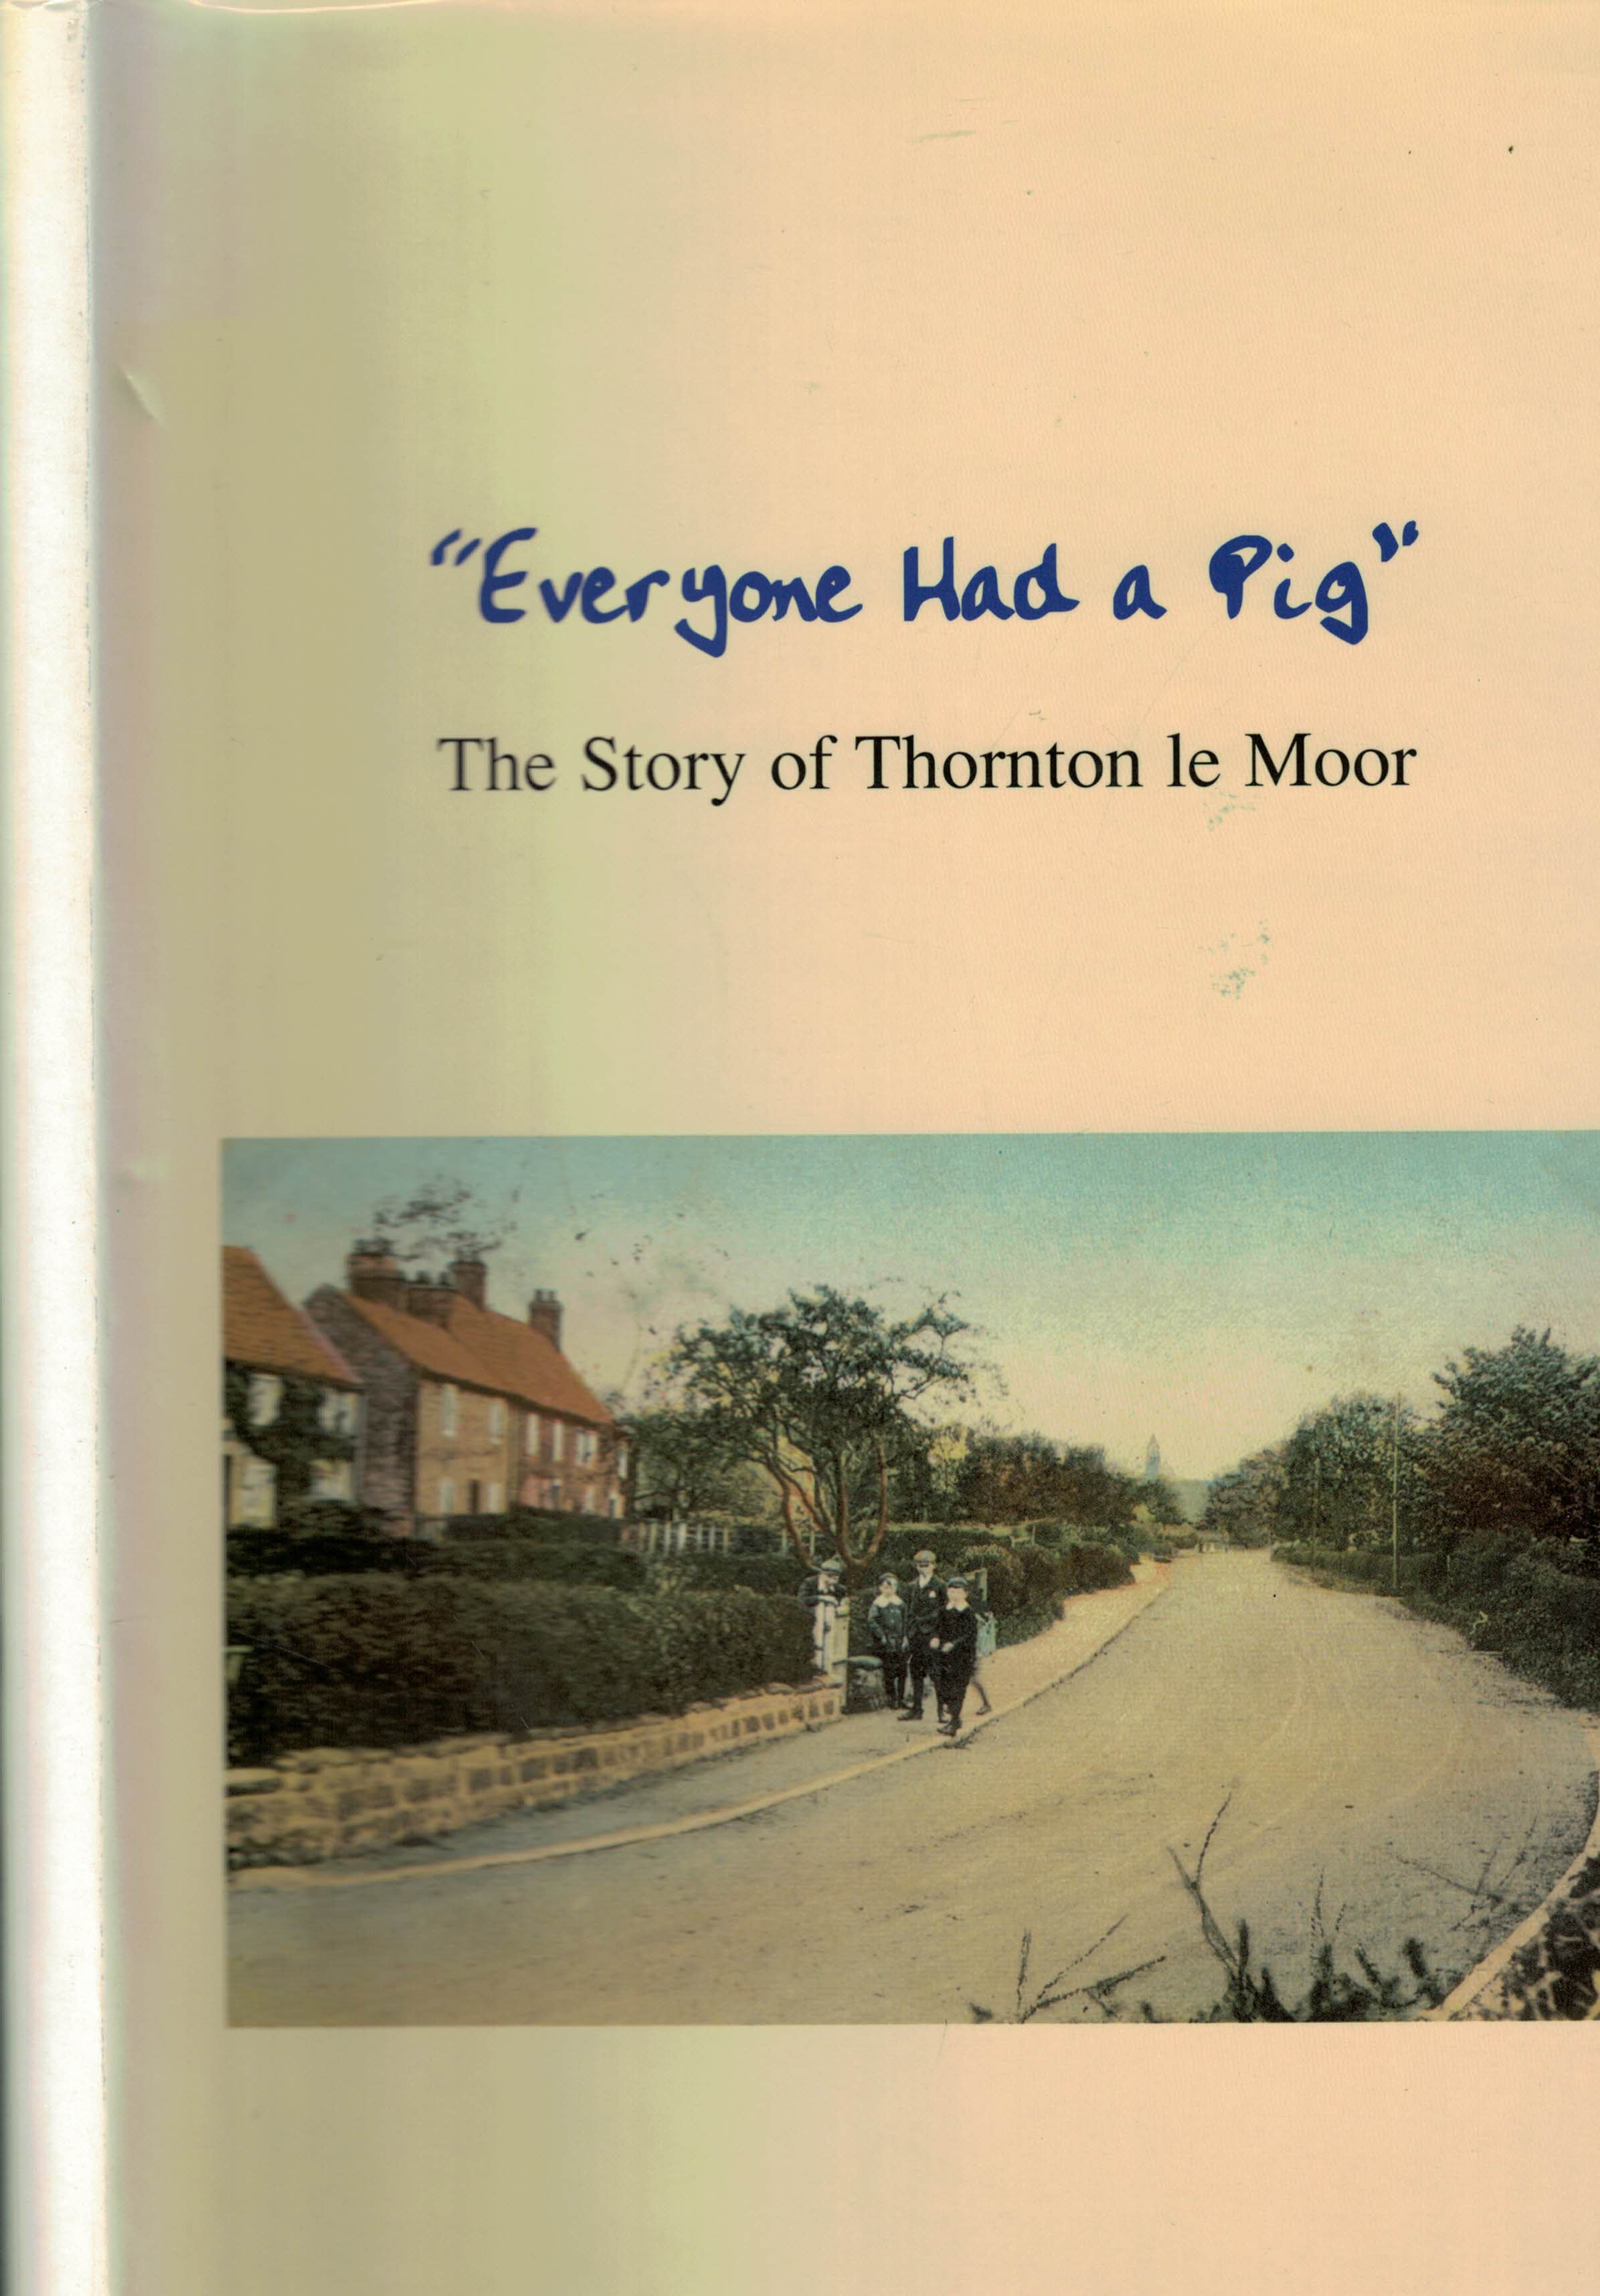 "Everyone Had a Pig". The Story of Thornton le Moor.